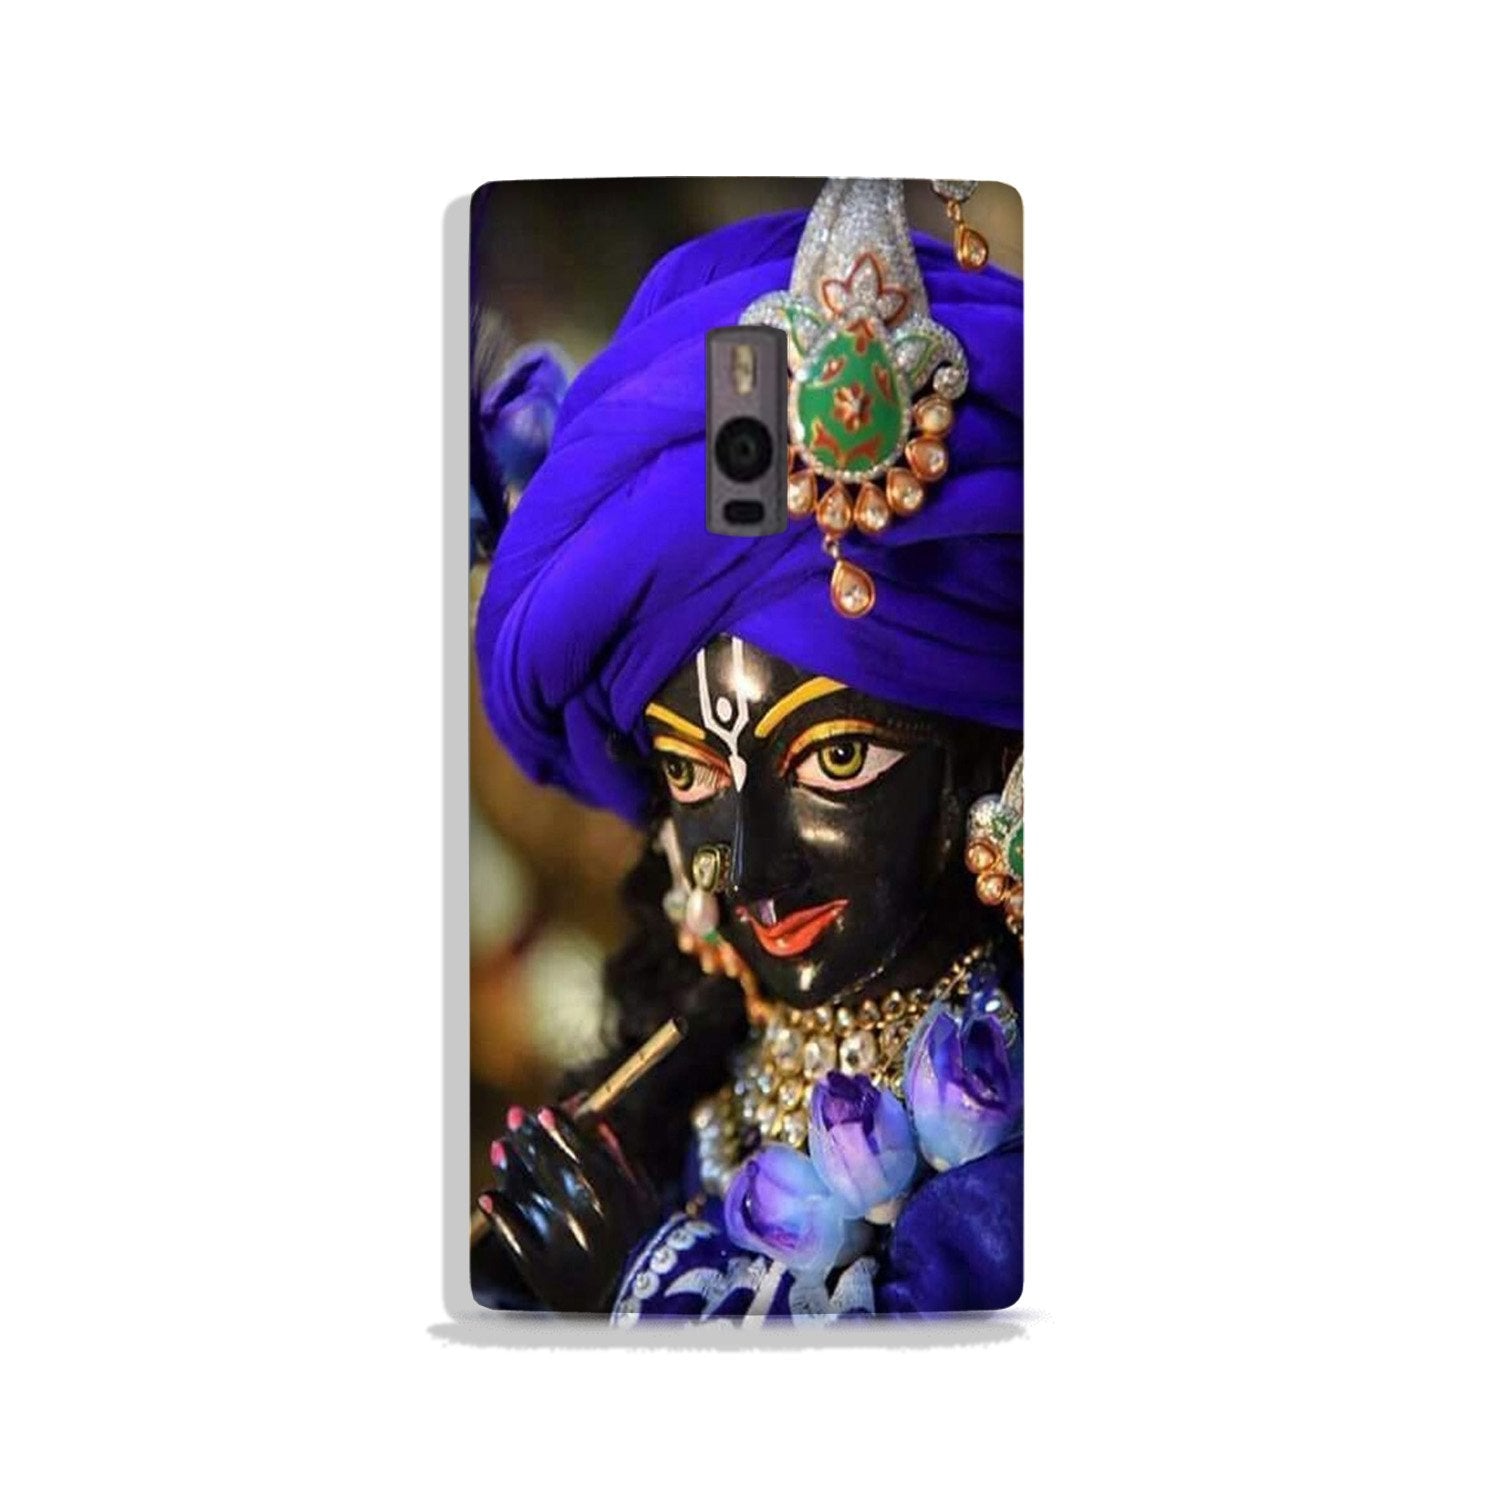 Lord Krishna4 Case for OnePlus 2